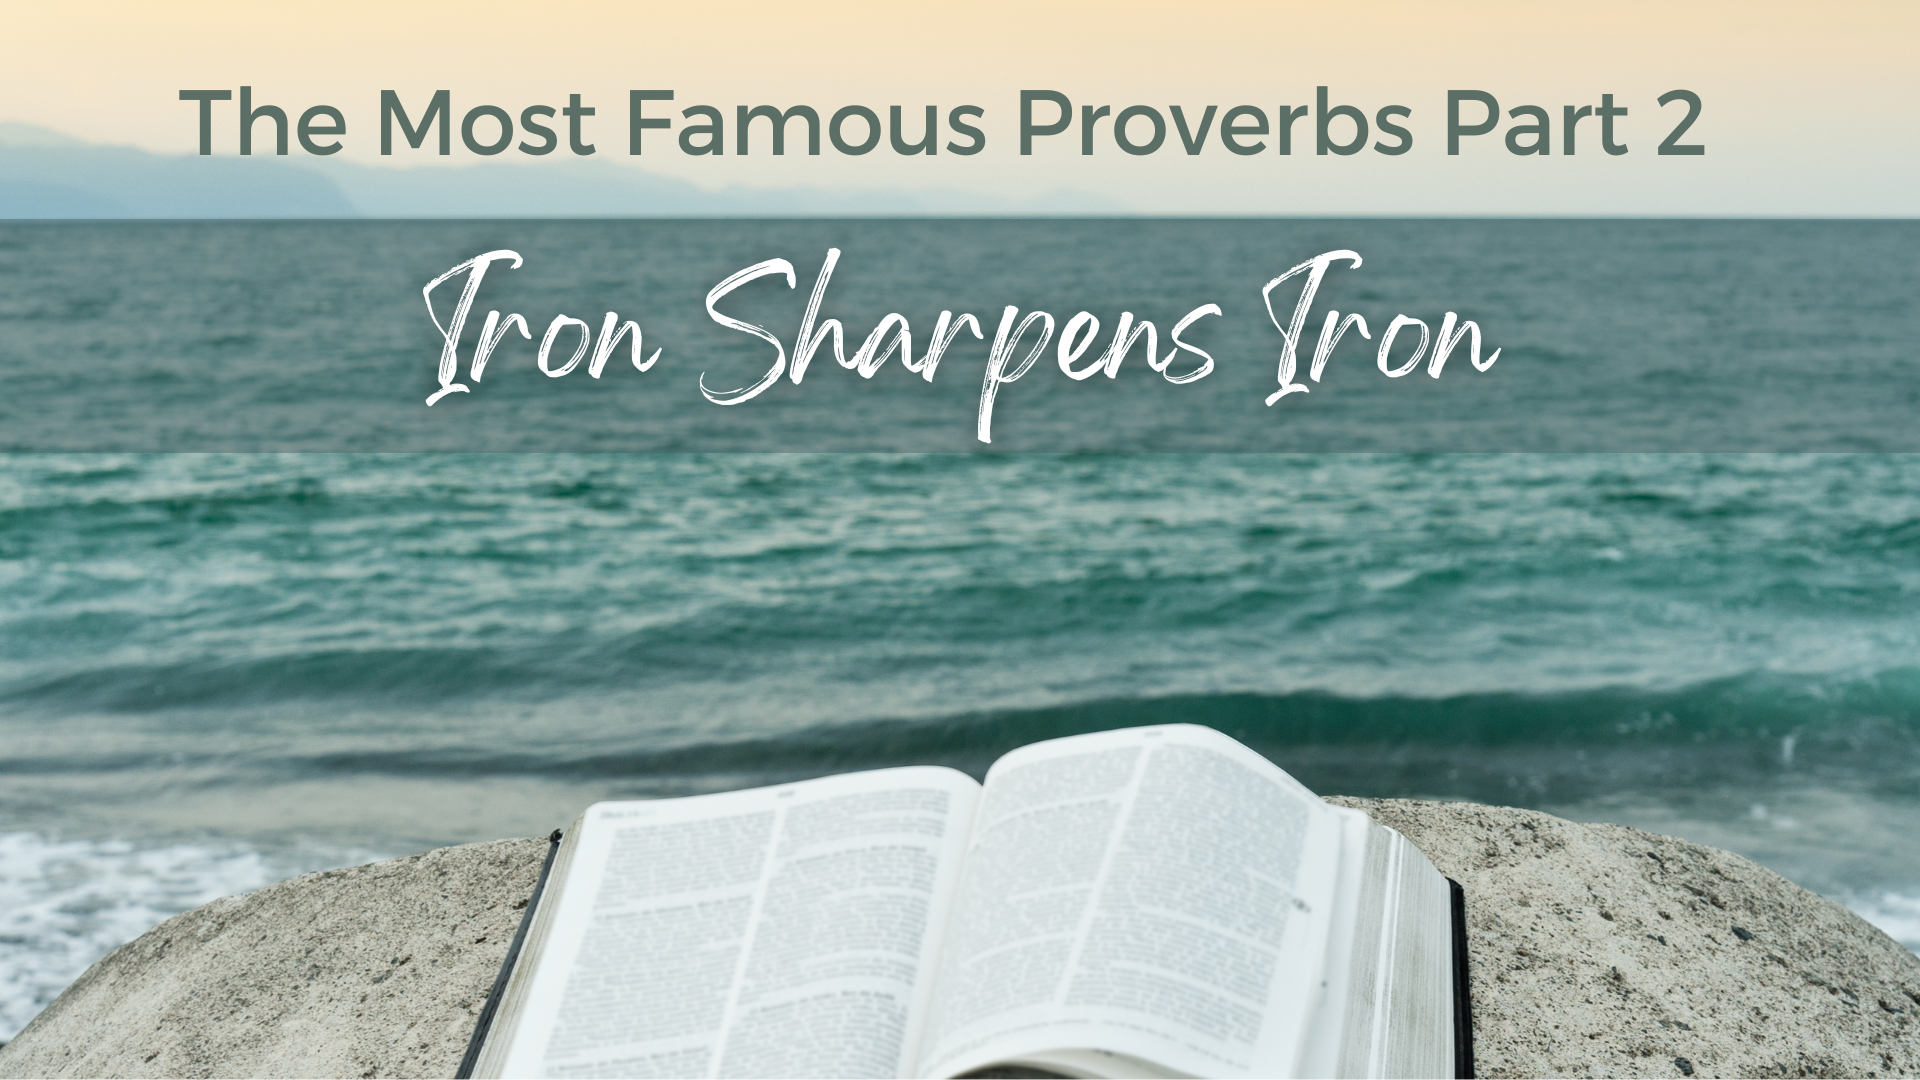 As Iron Sharpens Iron: The Most Famous Proverbs, Part 2